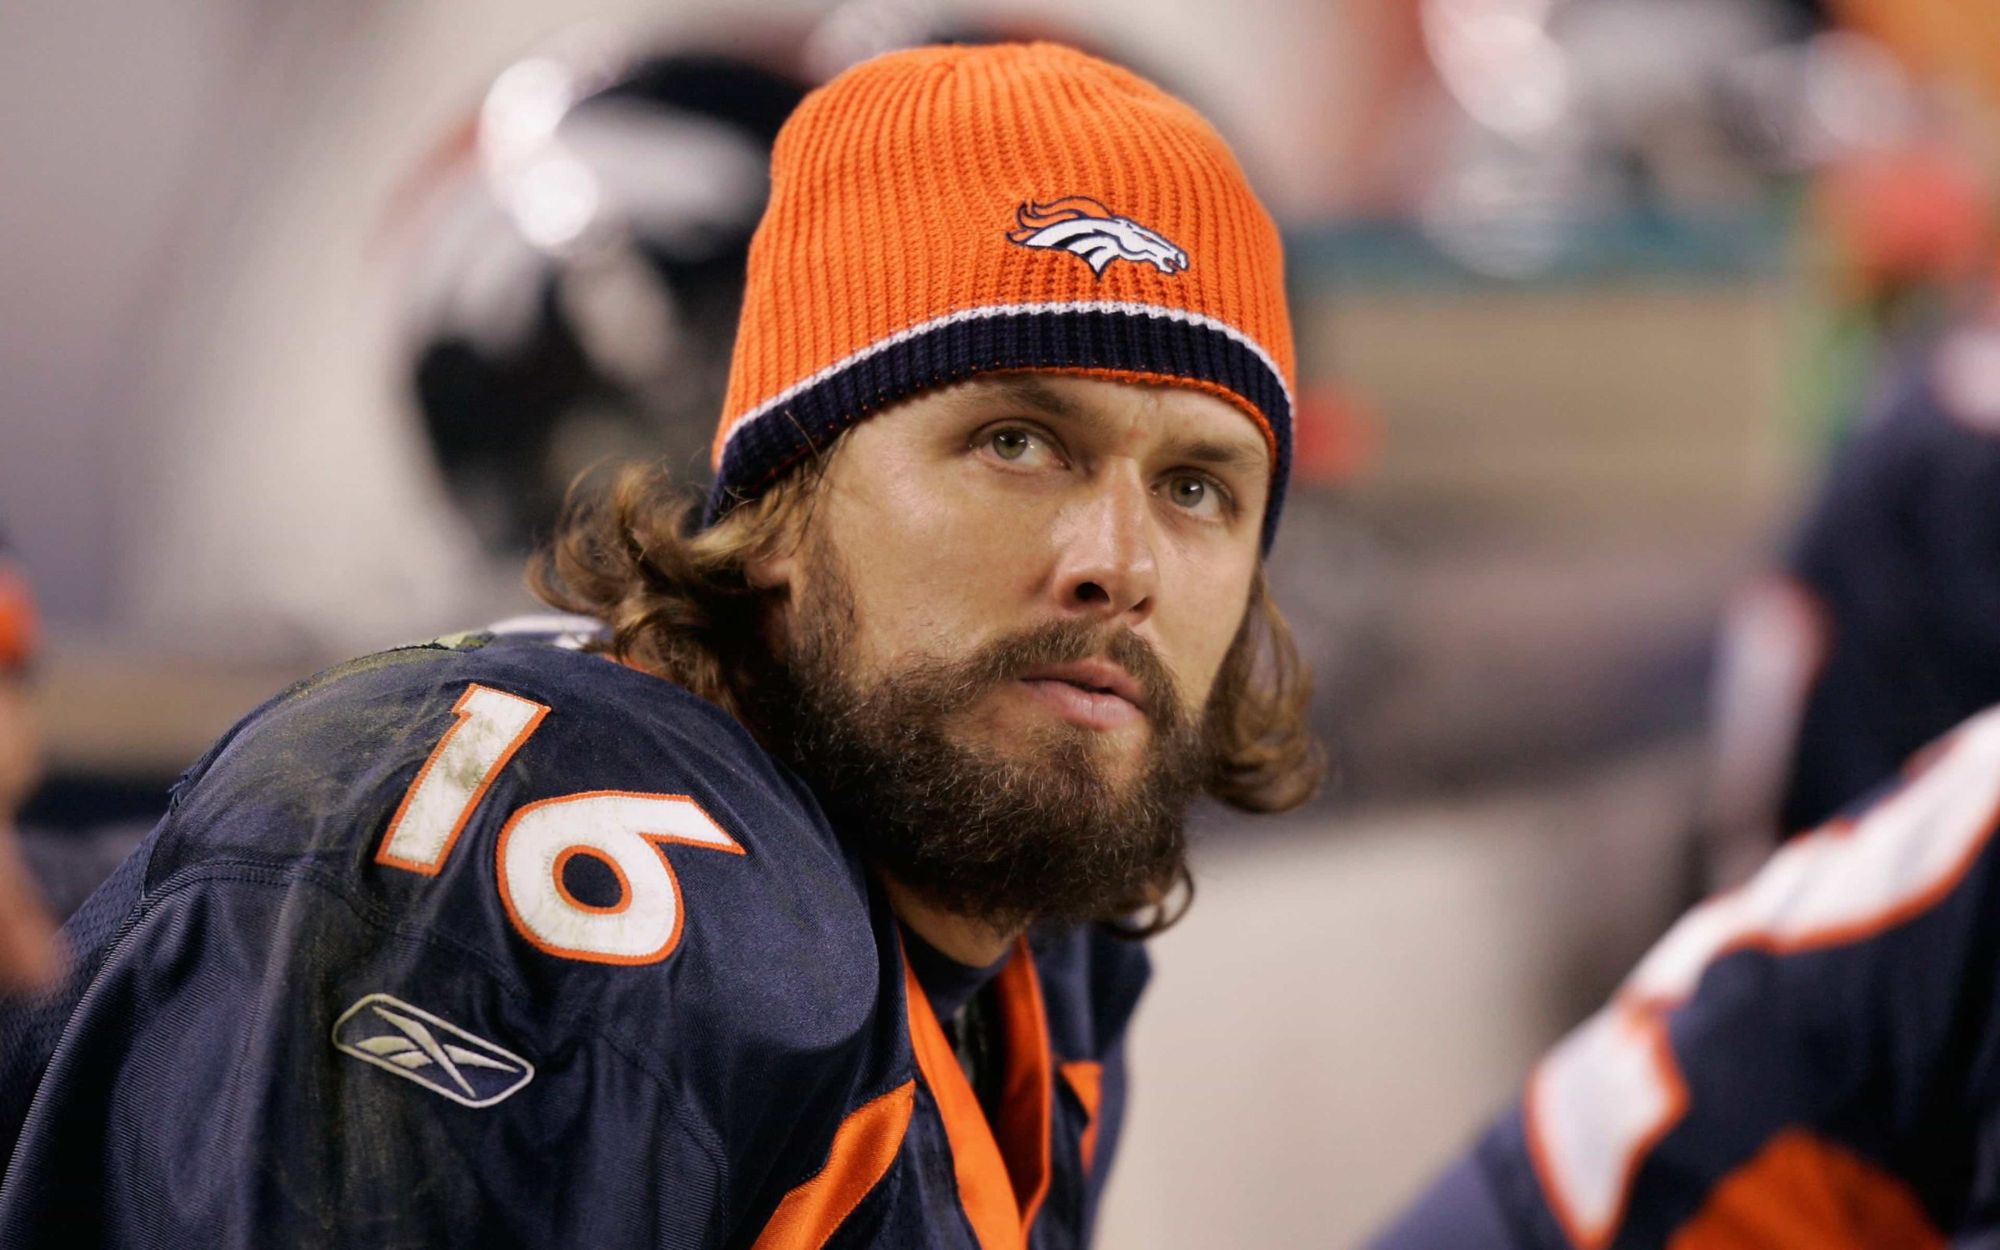 The Life And Career Of Jake Plummer (Complete Story)